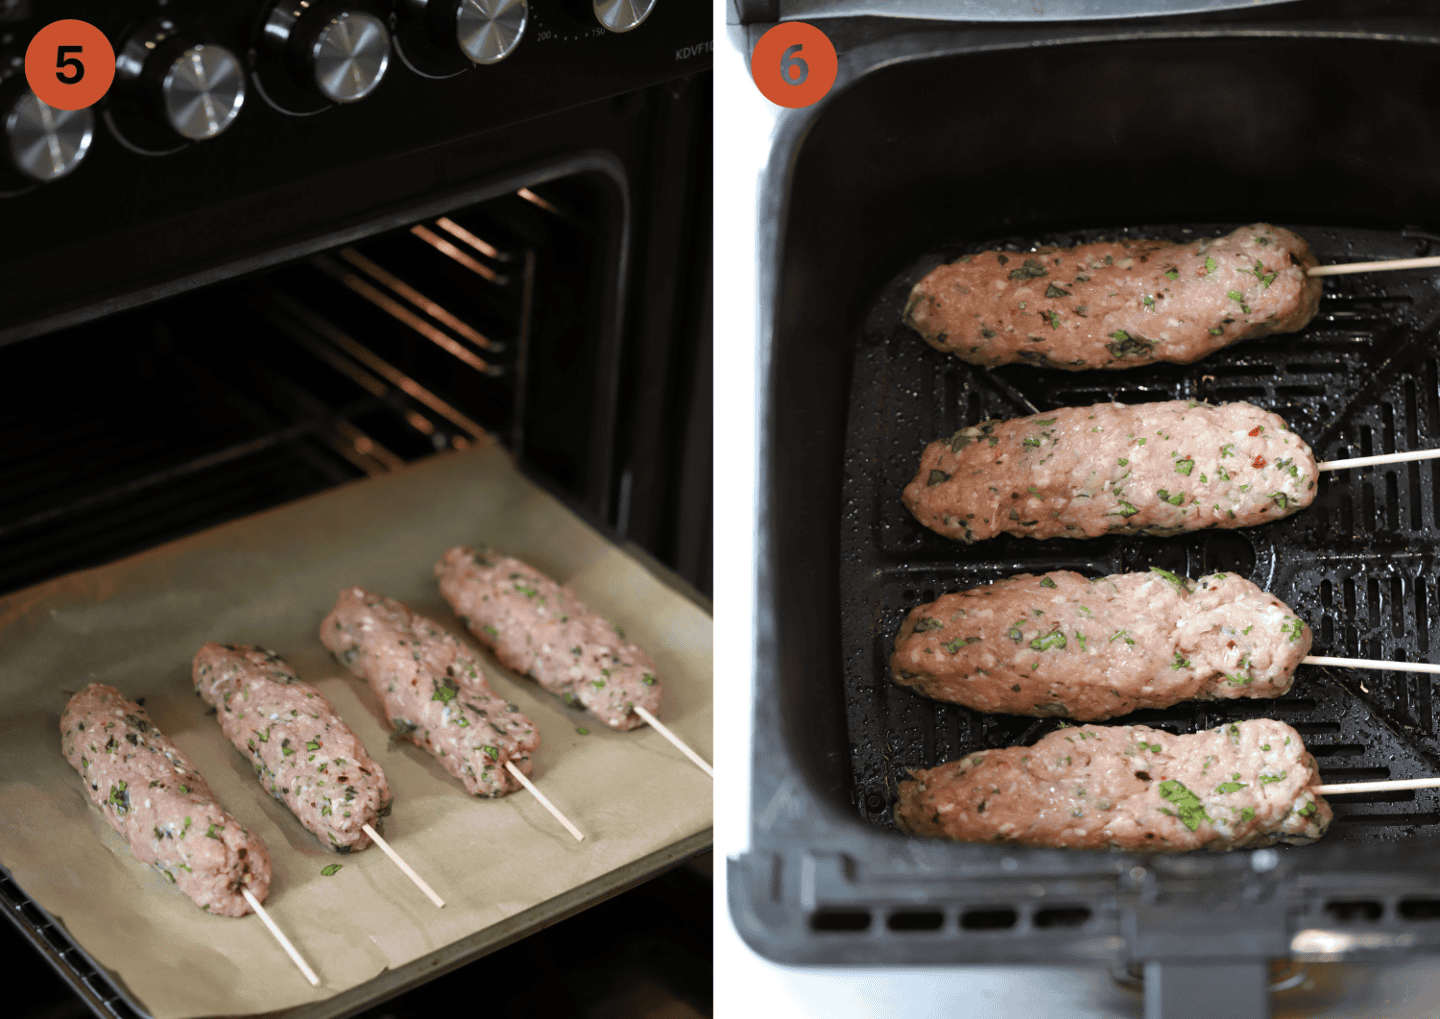 The pork koftas in the oven (left) and air fryer basket (right).